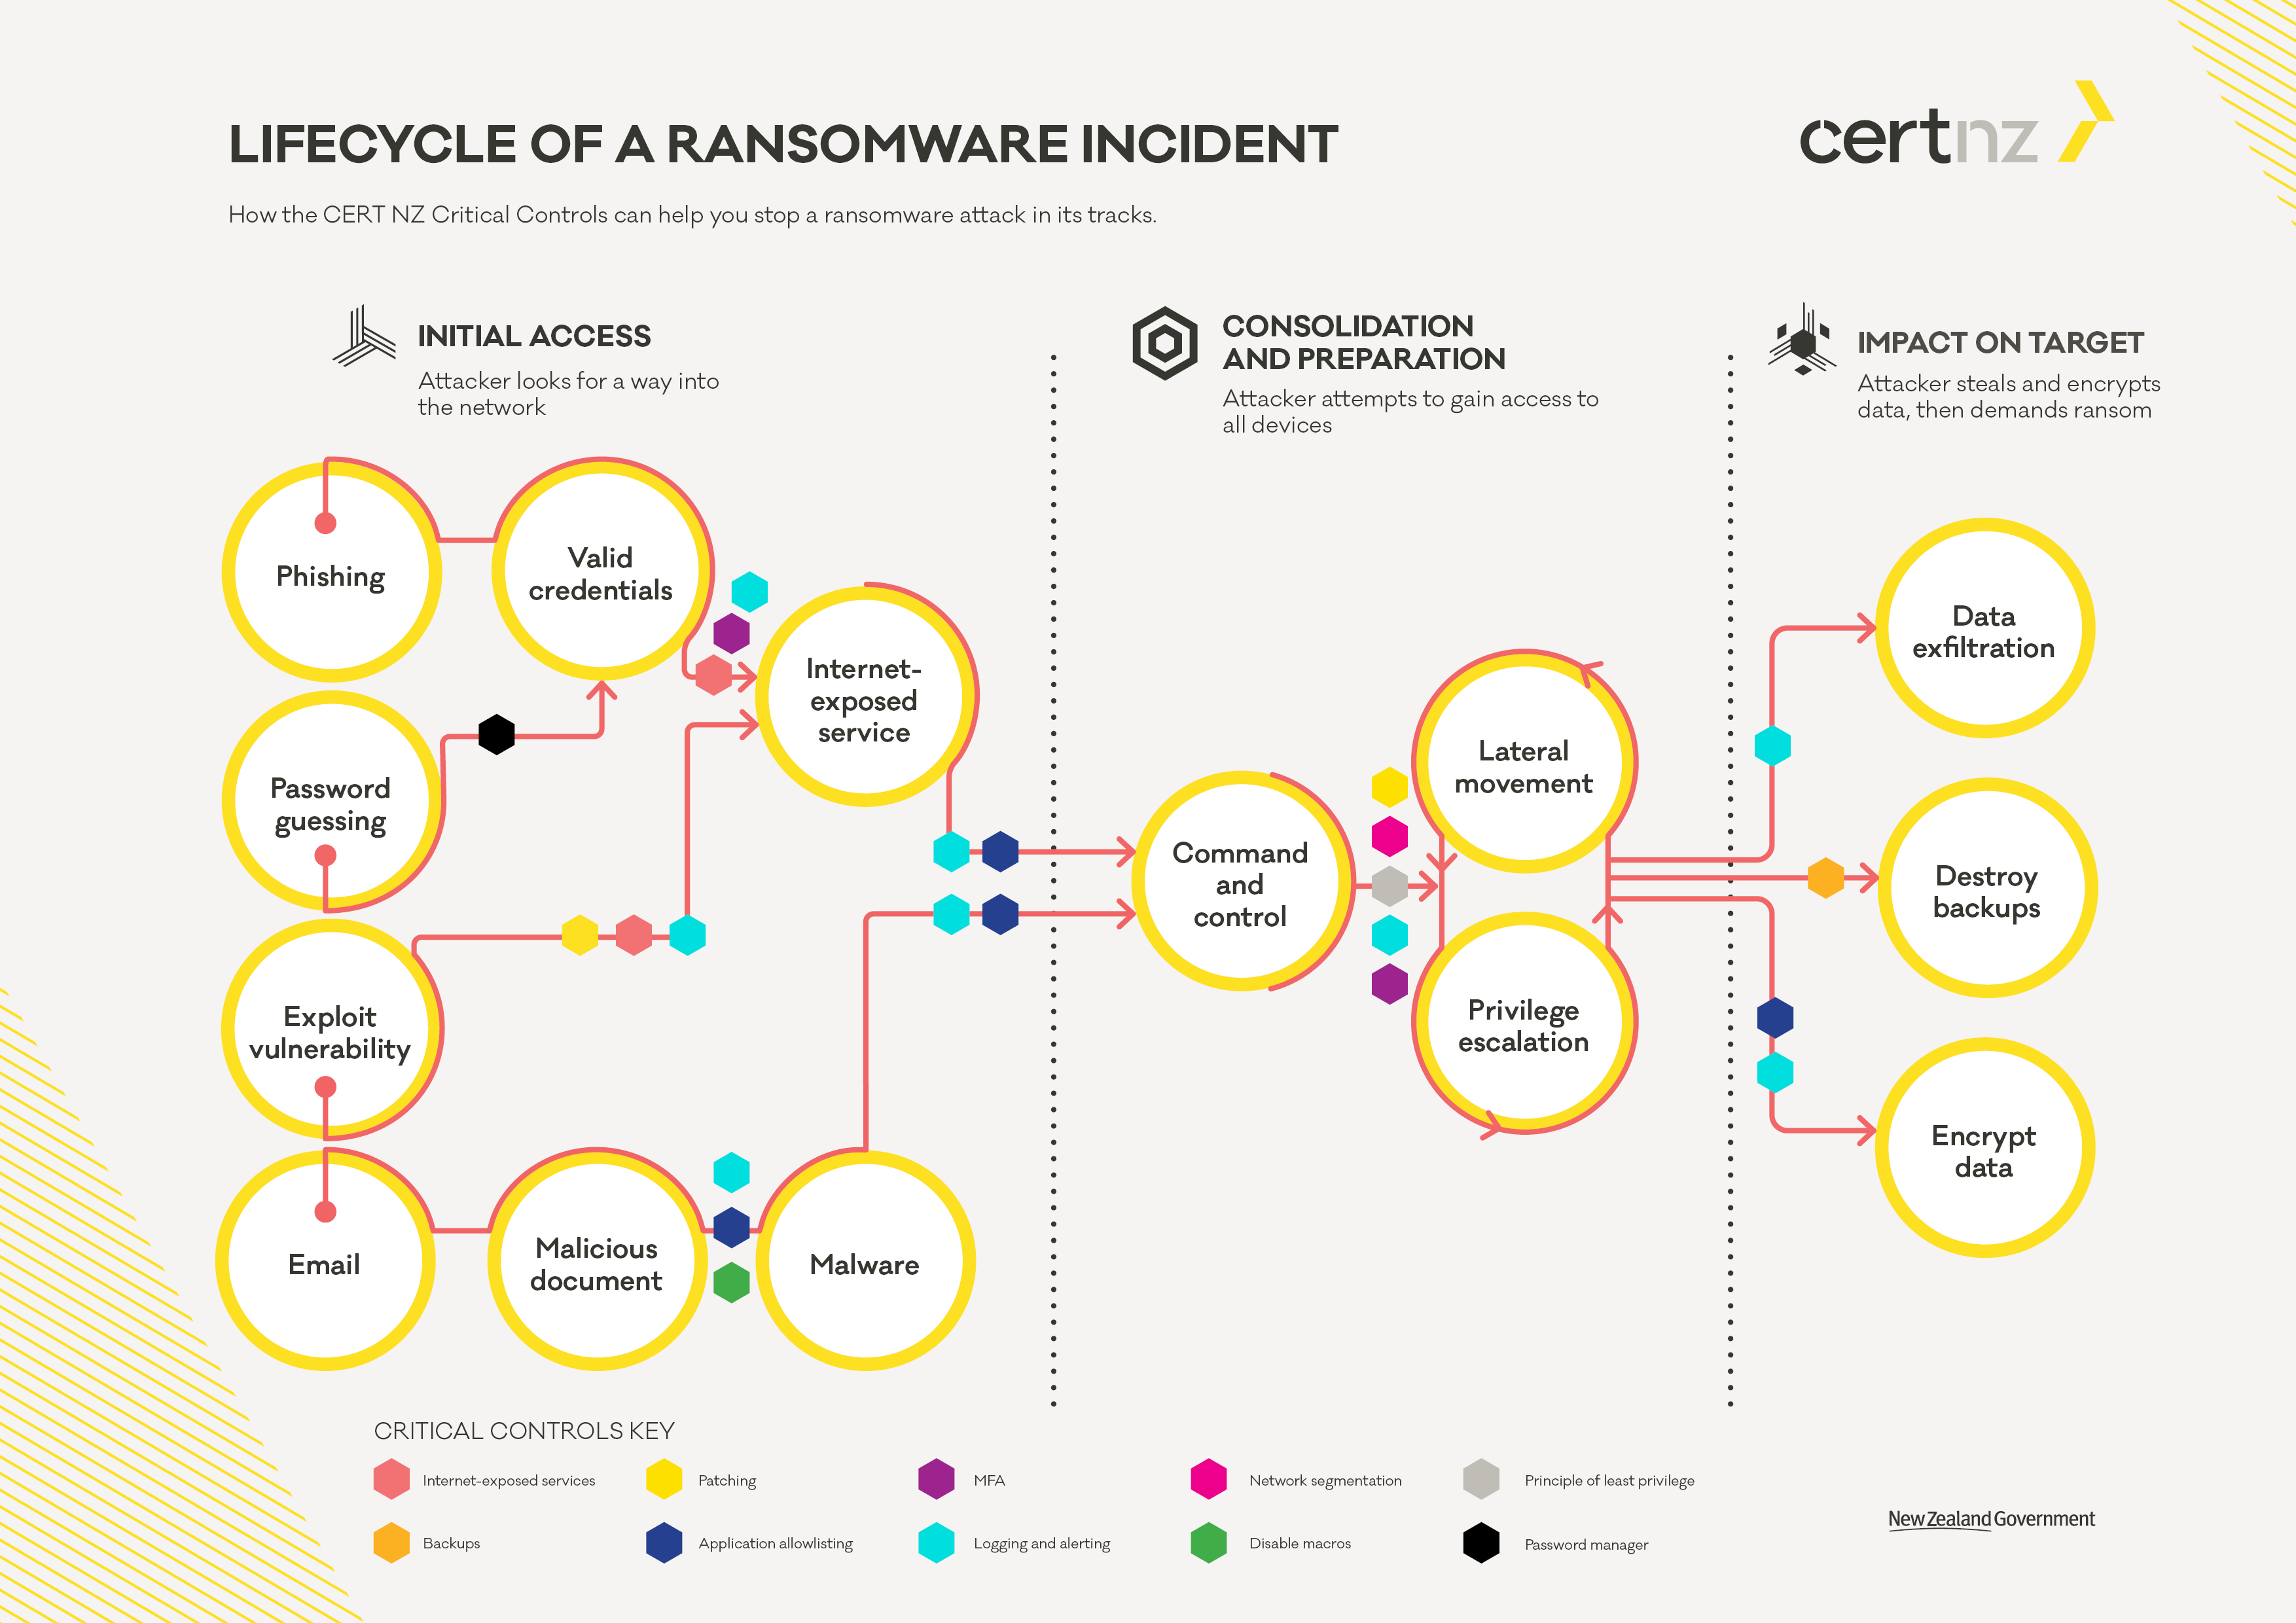 6860 CERT Lifecycle of a Ransomware Incident v102